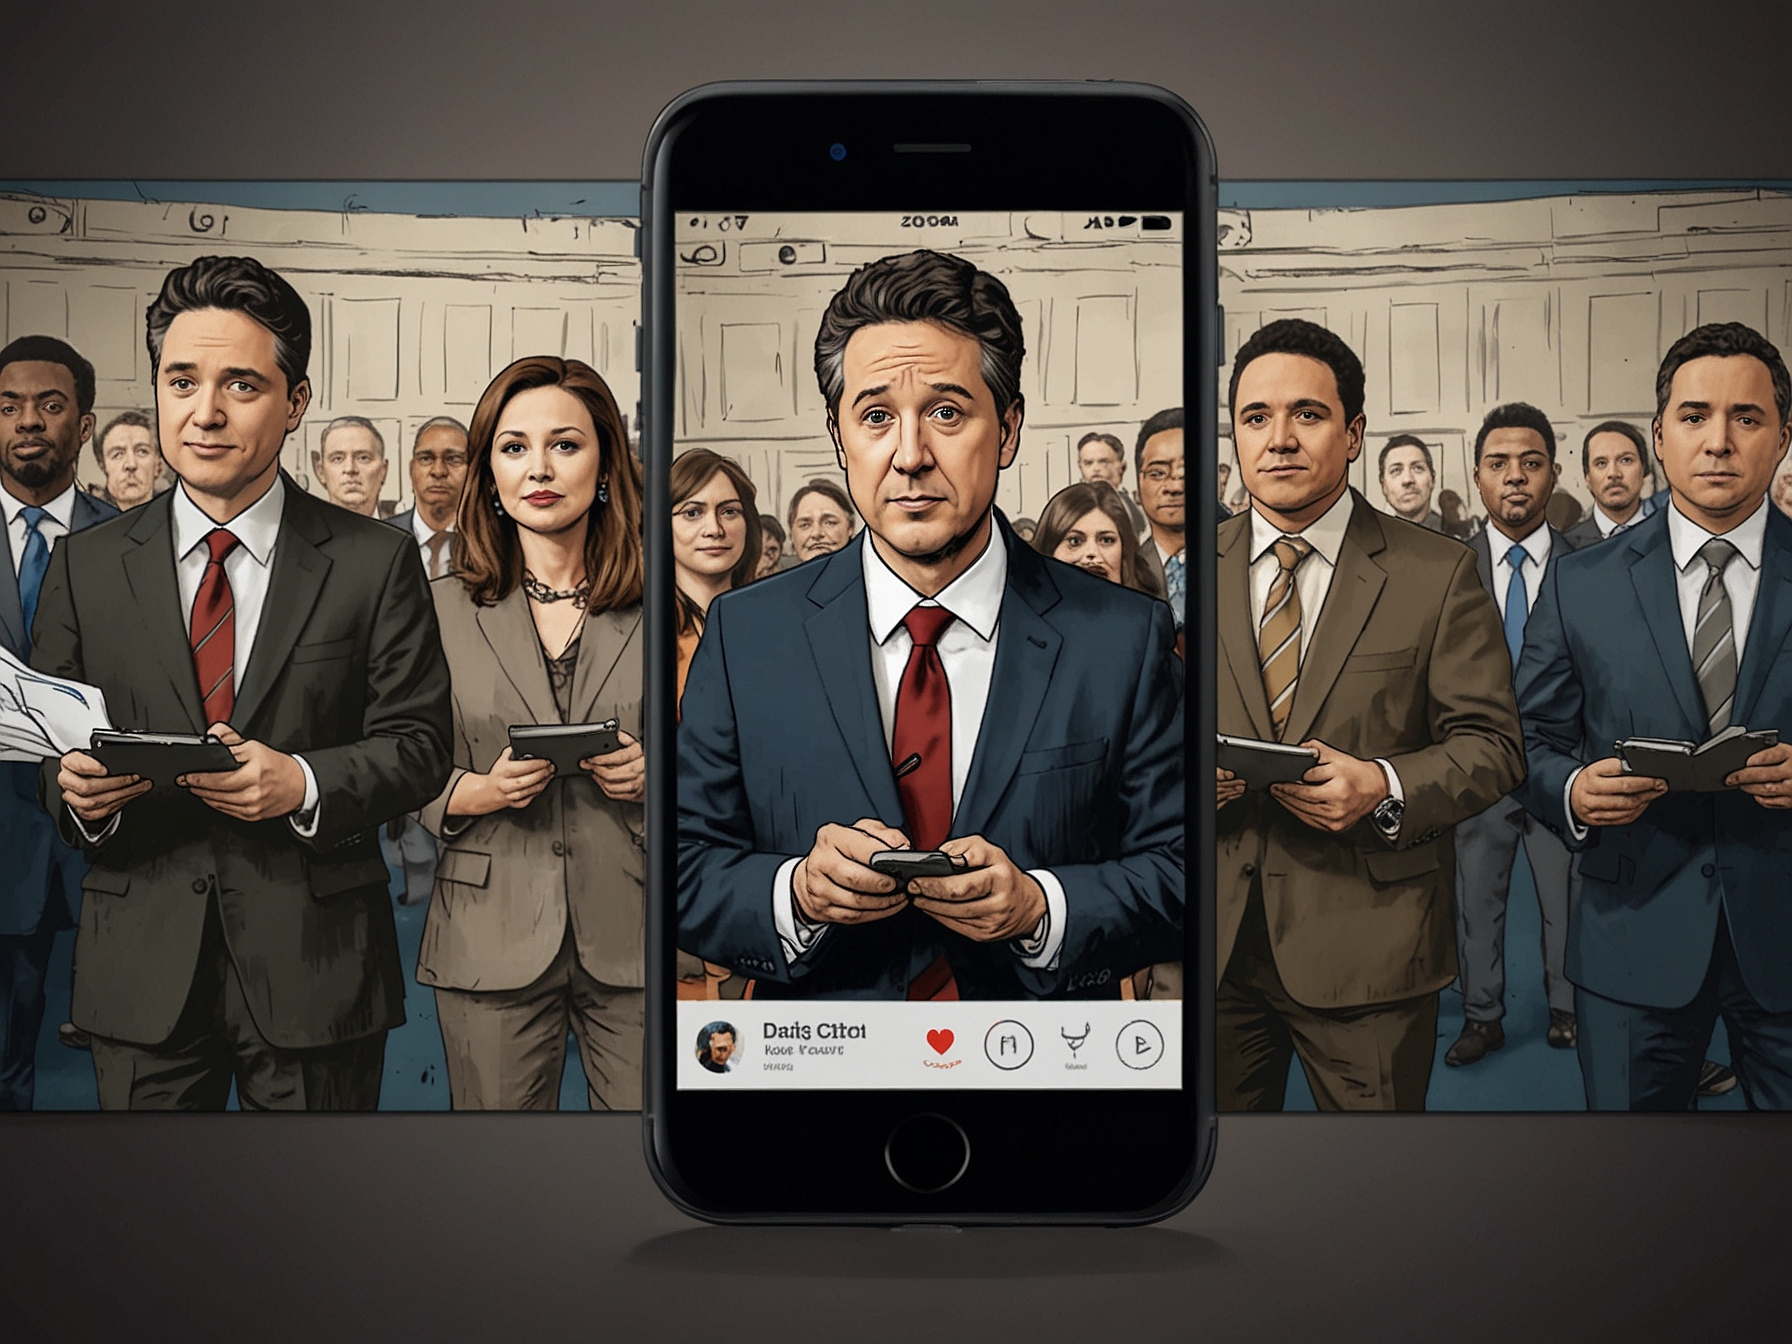 A smartphone showing clips of The Daily Show on YouTube, highlighting another way to catch up on recent episodes and segments for free.